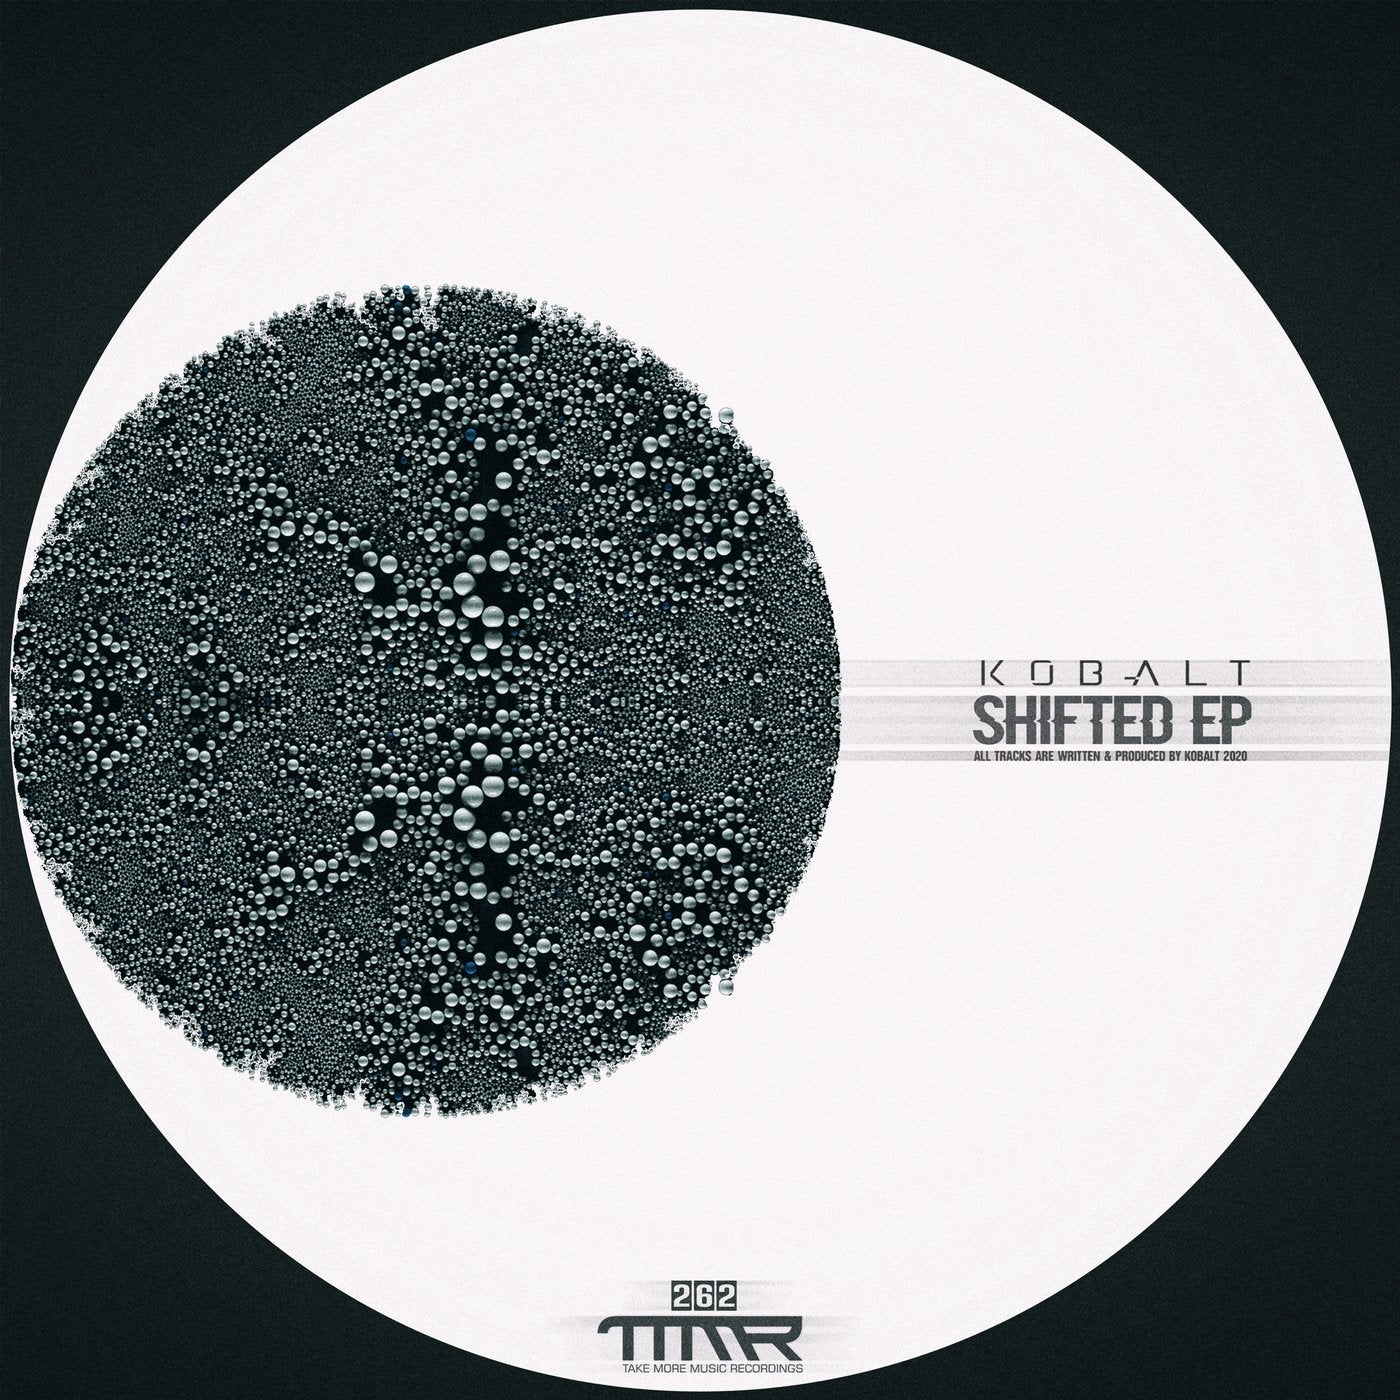 Shifted EP